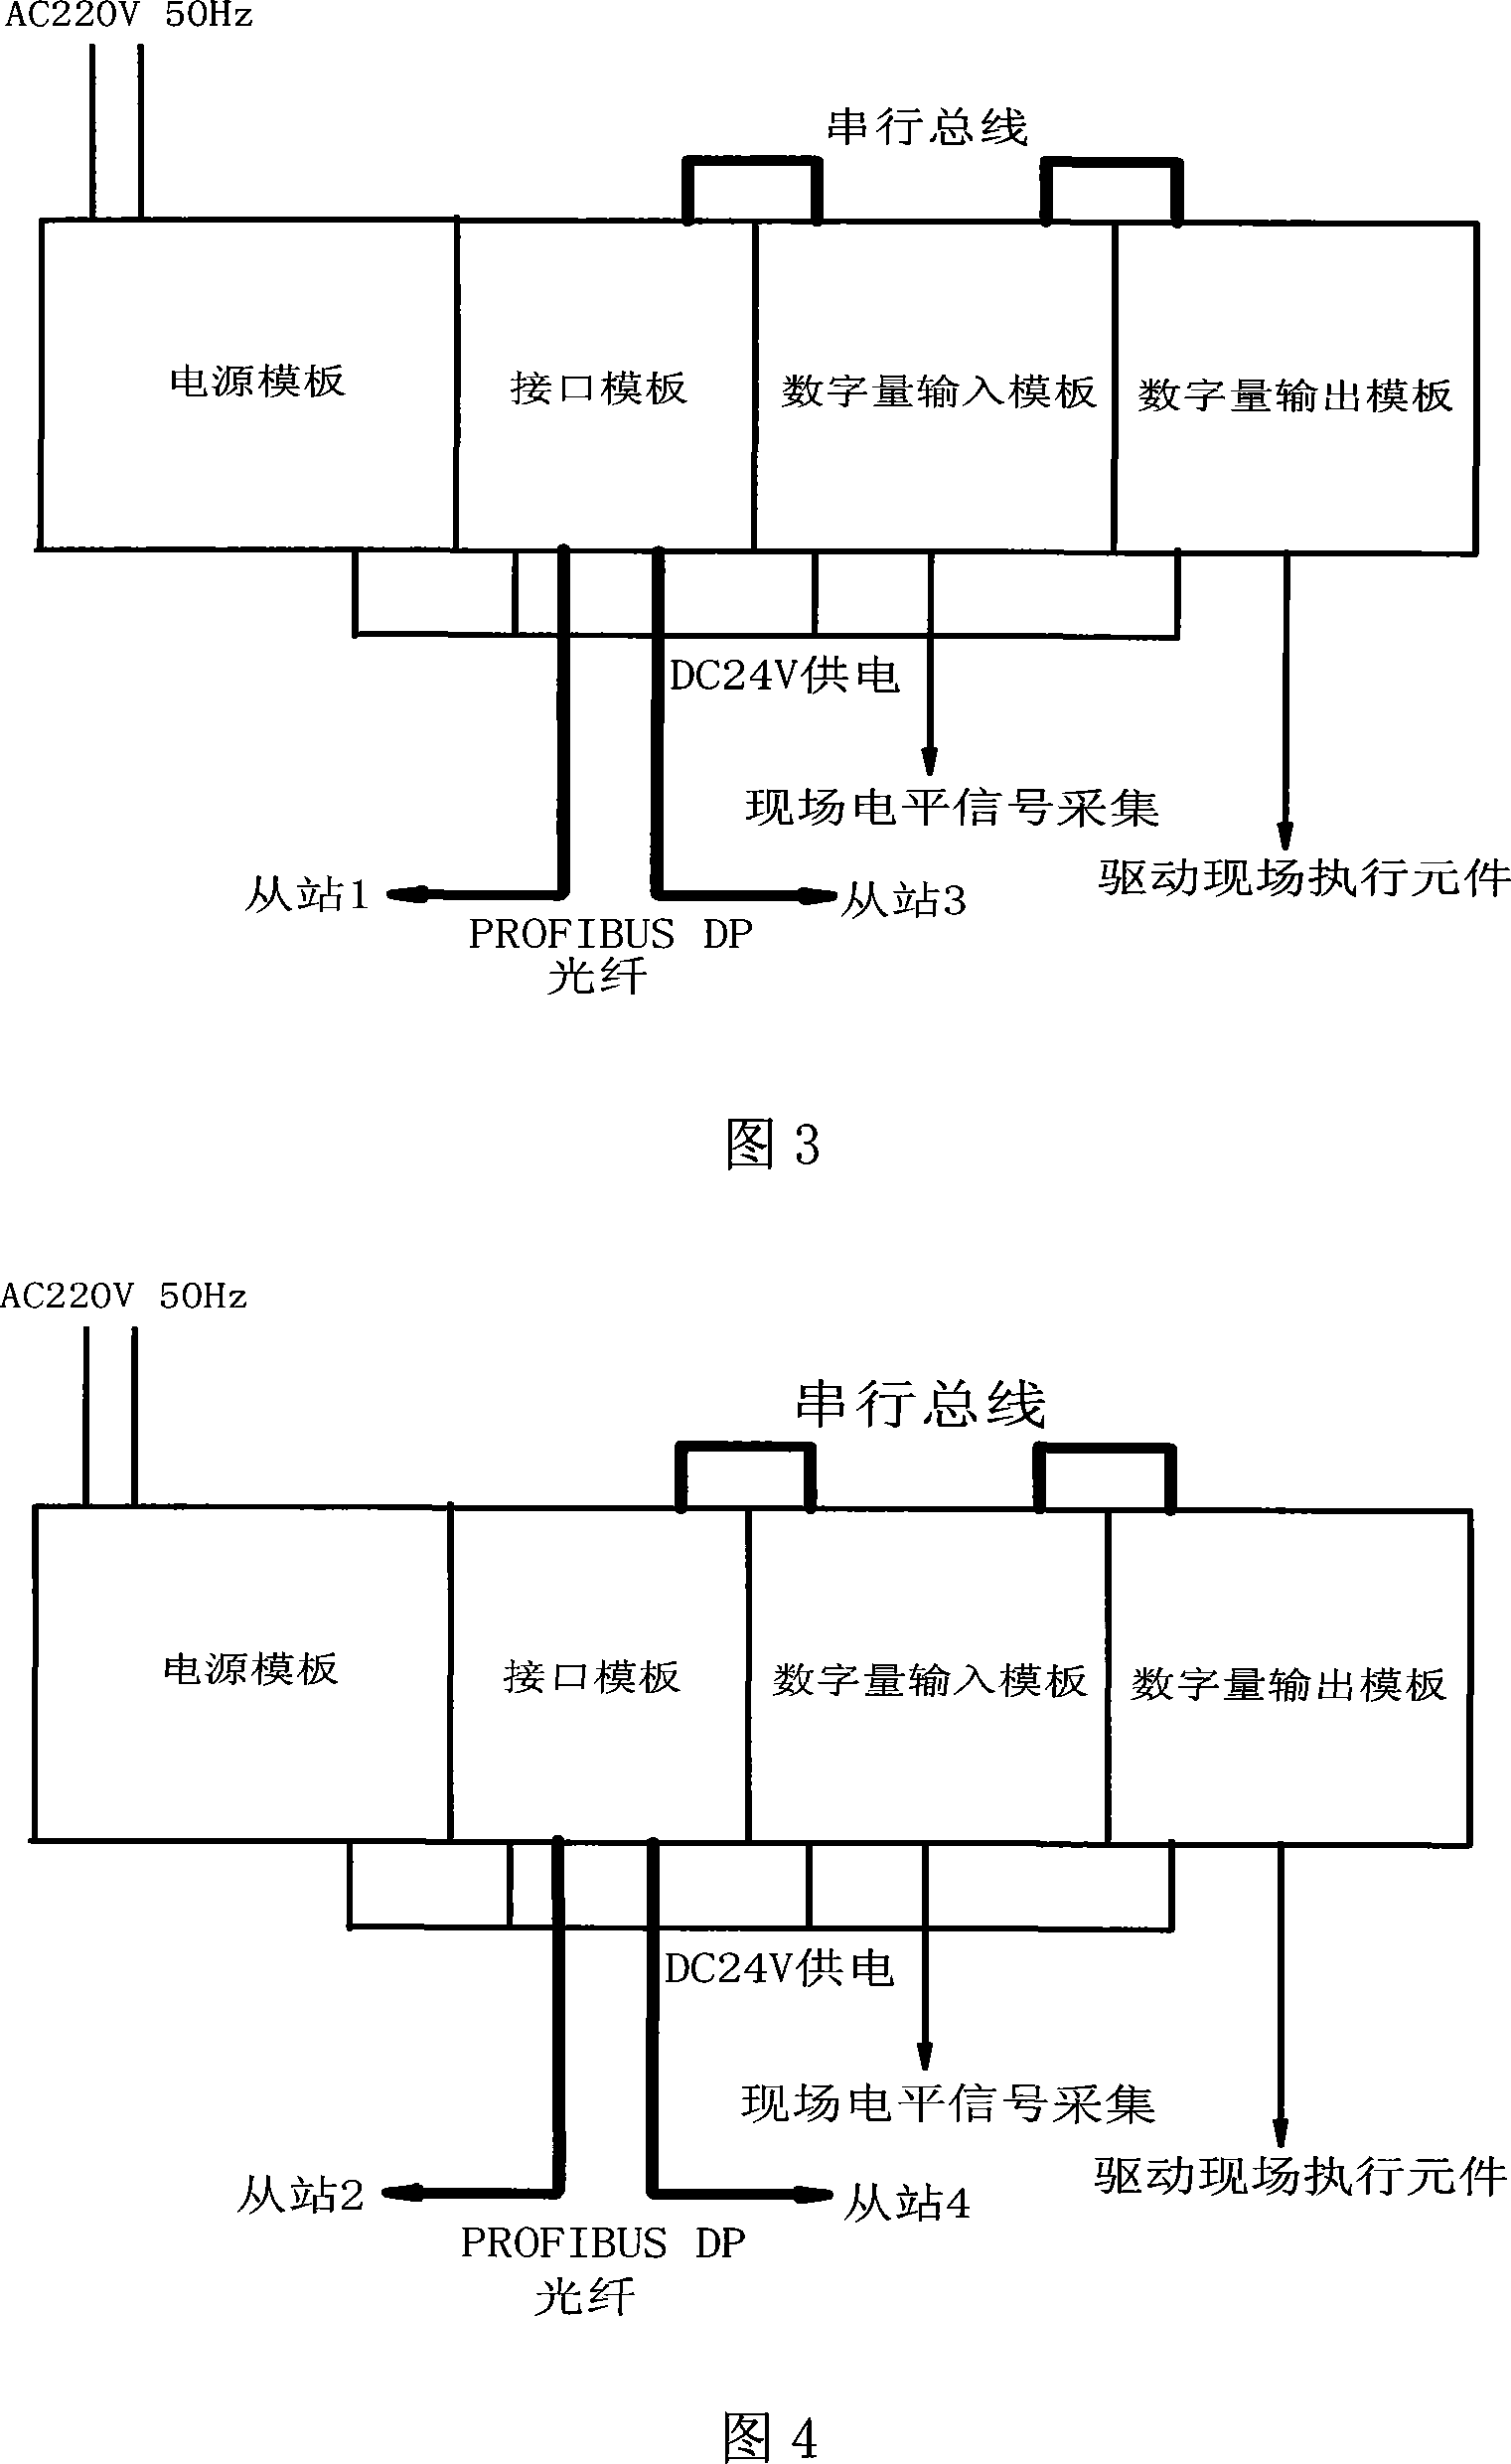 Electrical control workstation of macrotype isostatic pressing machine